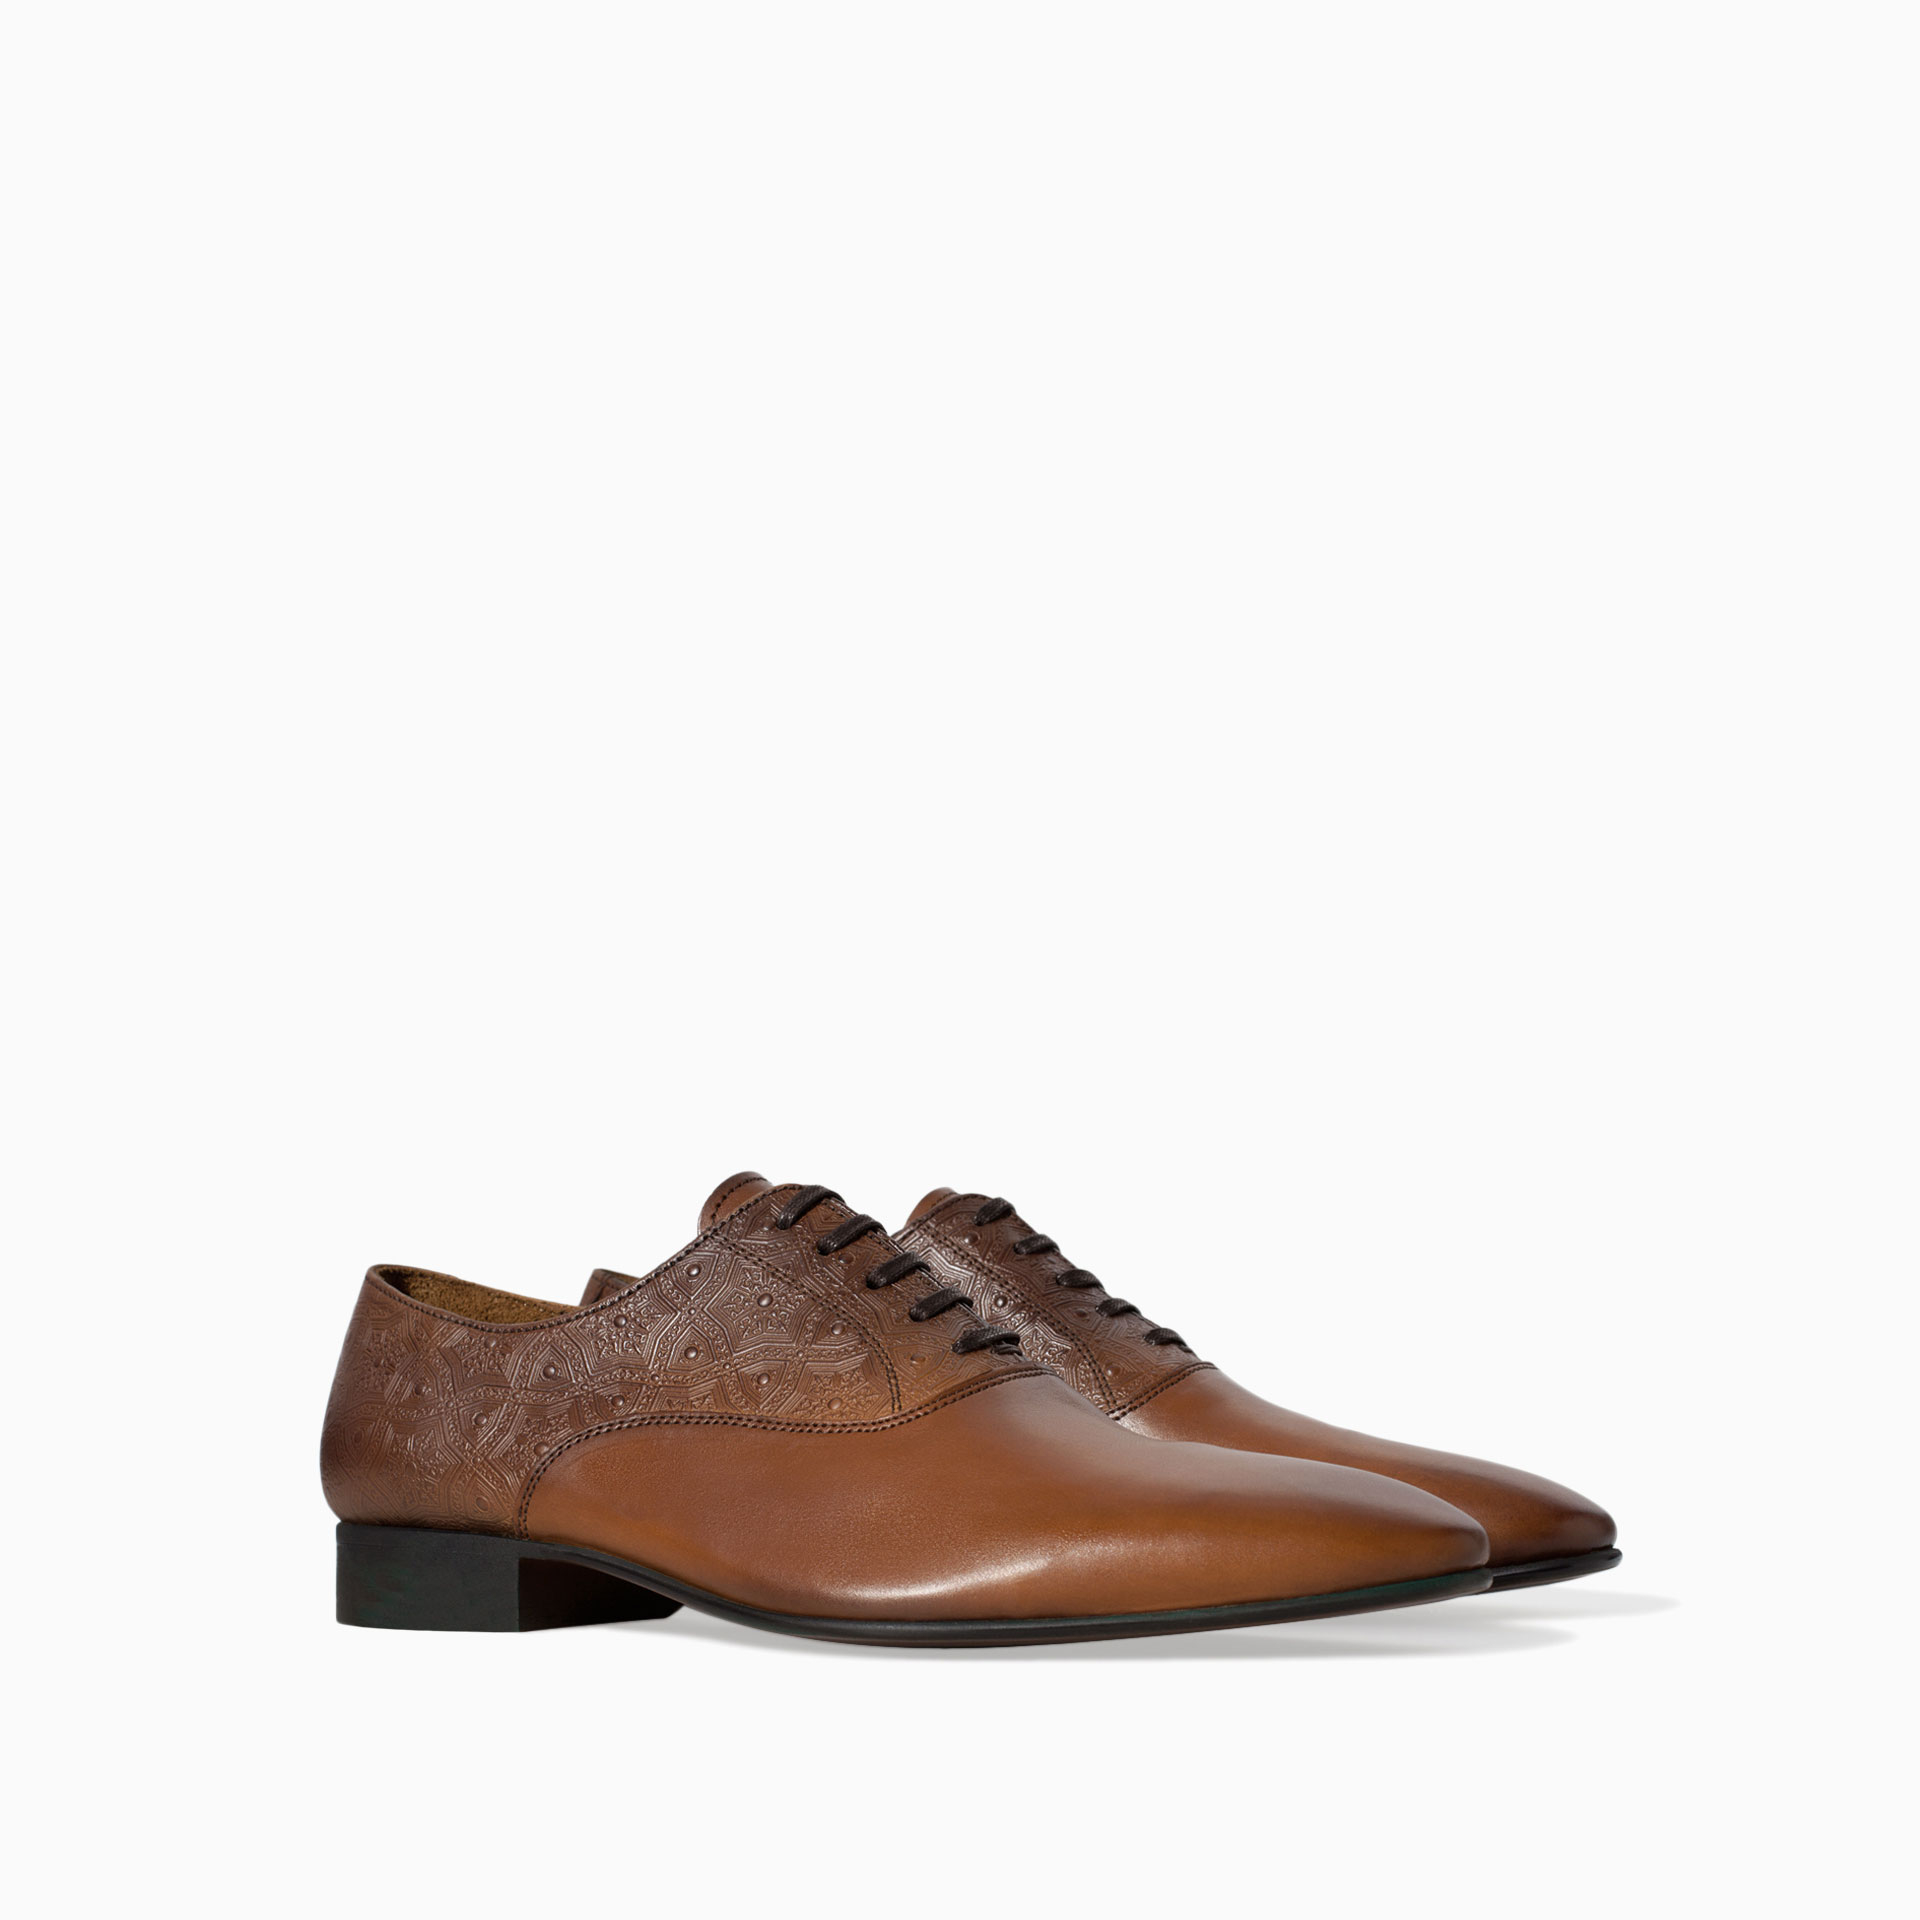 Zara Brushed Leather Oxford Shoe in Brown for Men (Tobacco) | Lyst